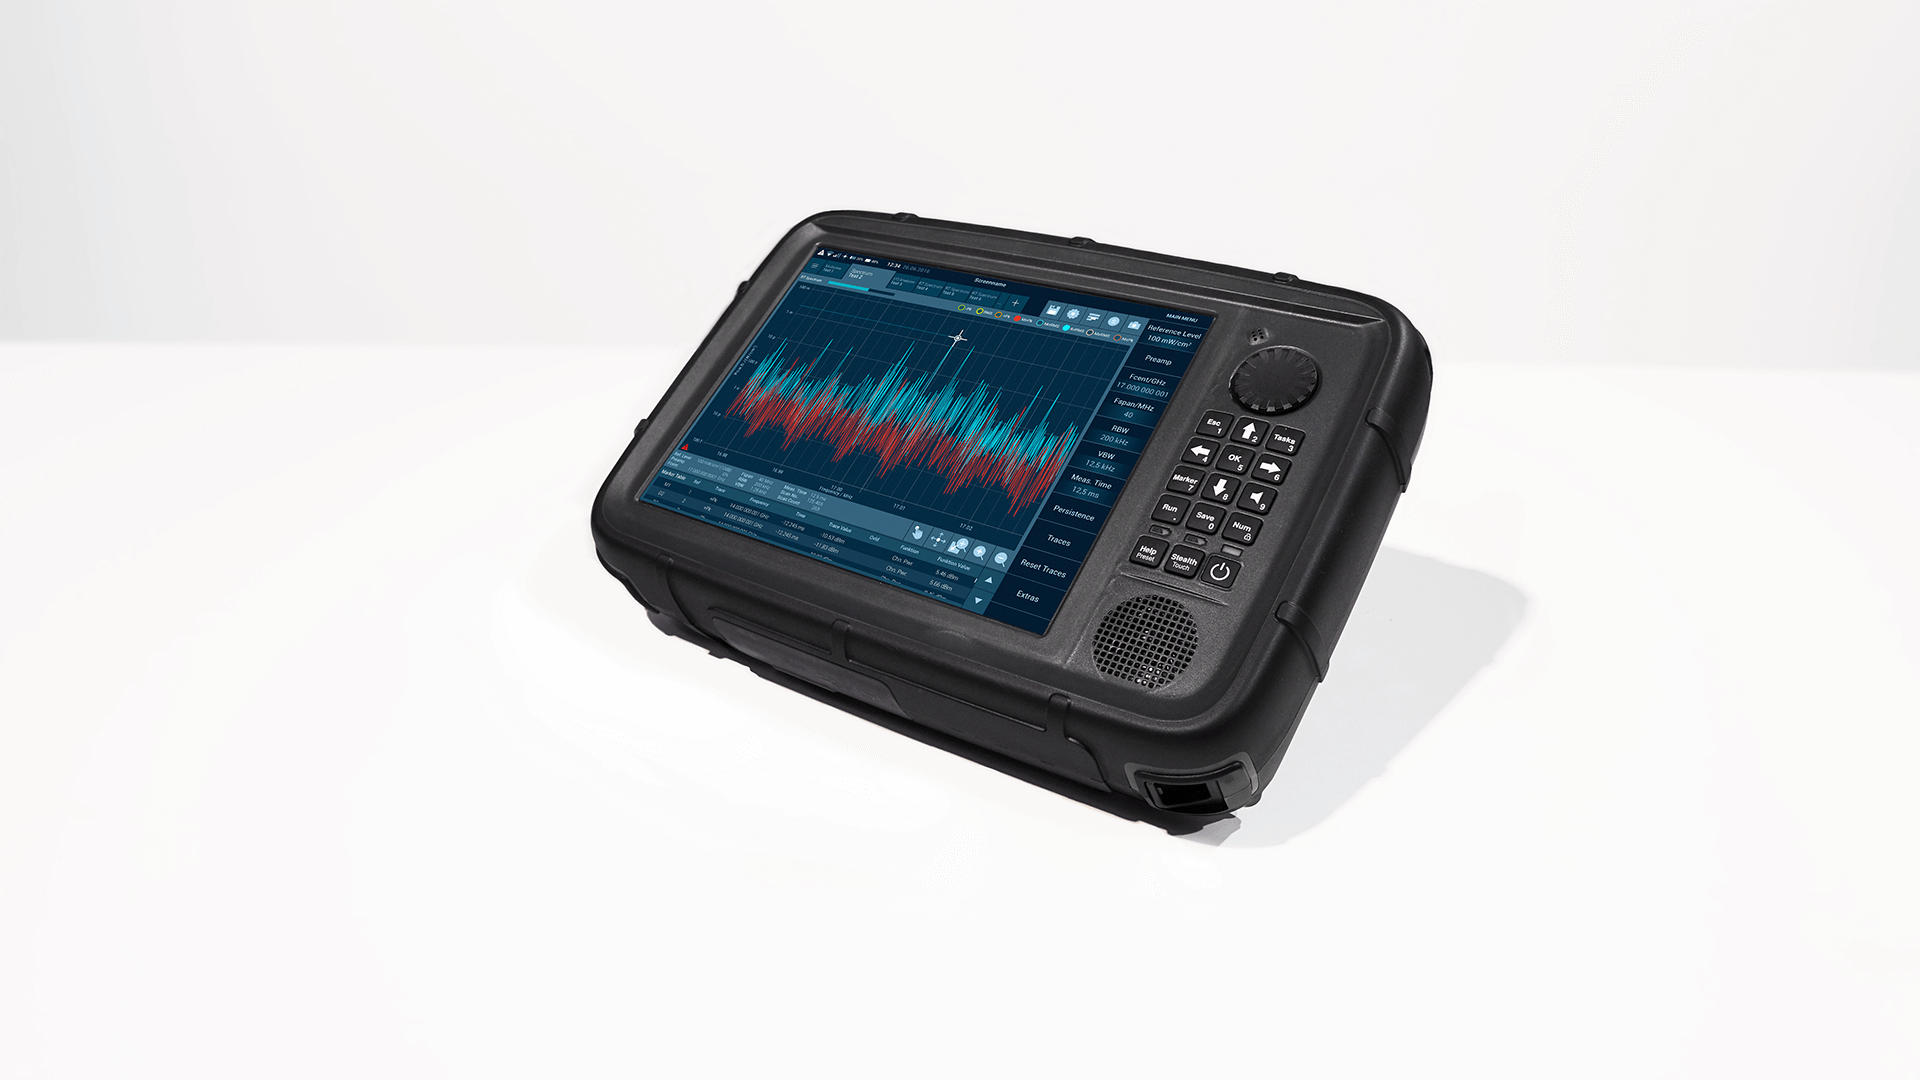 The black radiation measuring device SignalShark from Narda with a blue user interface, photographed diagonally from the top right.